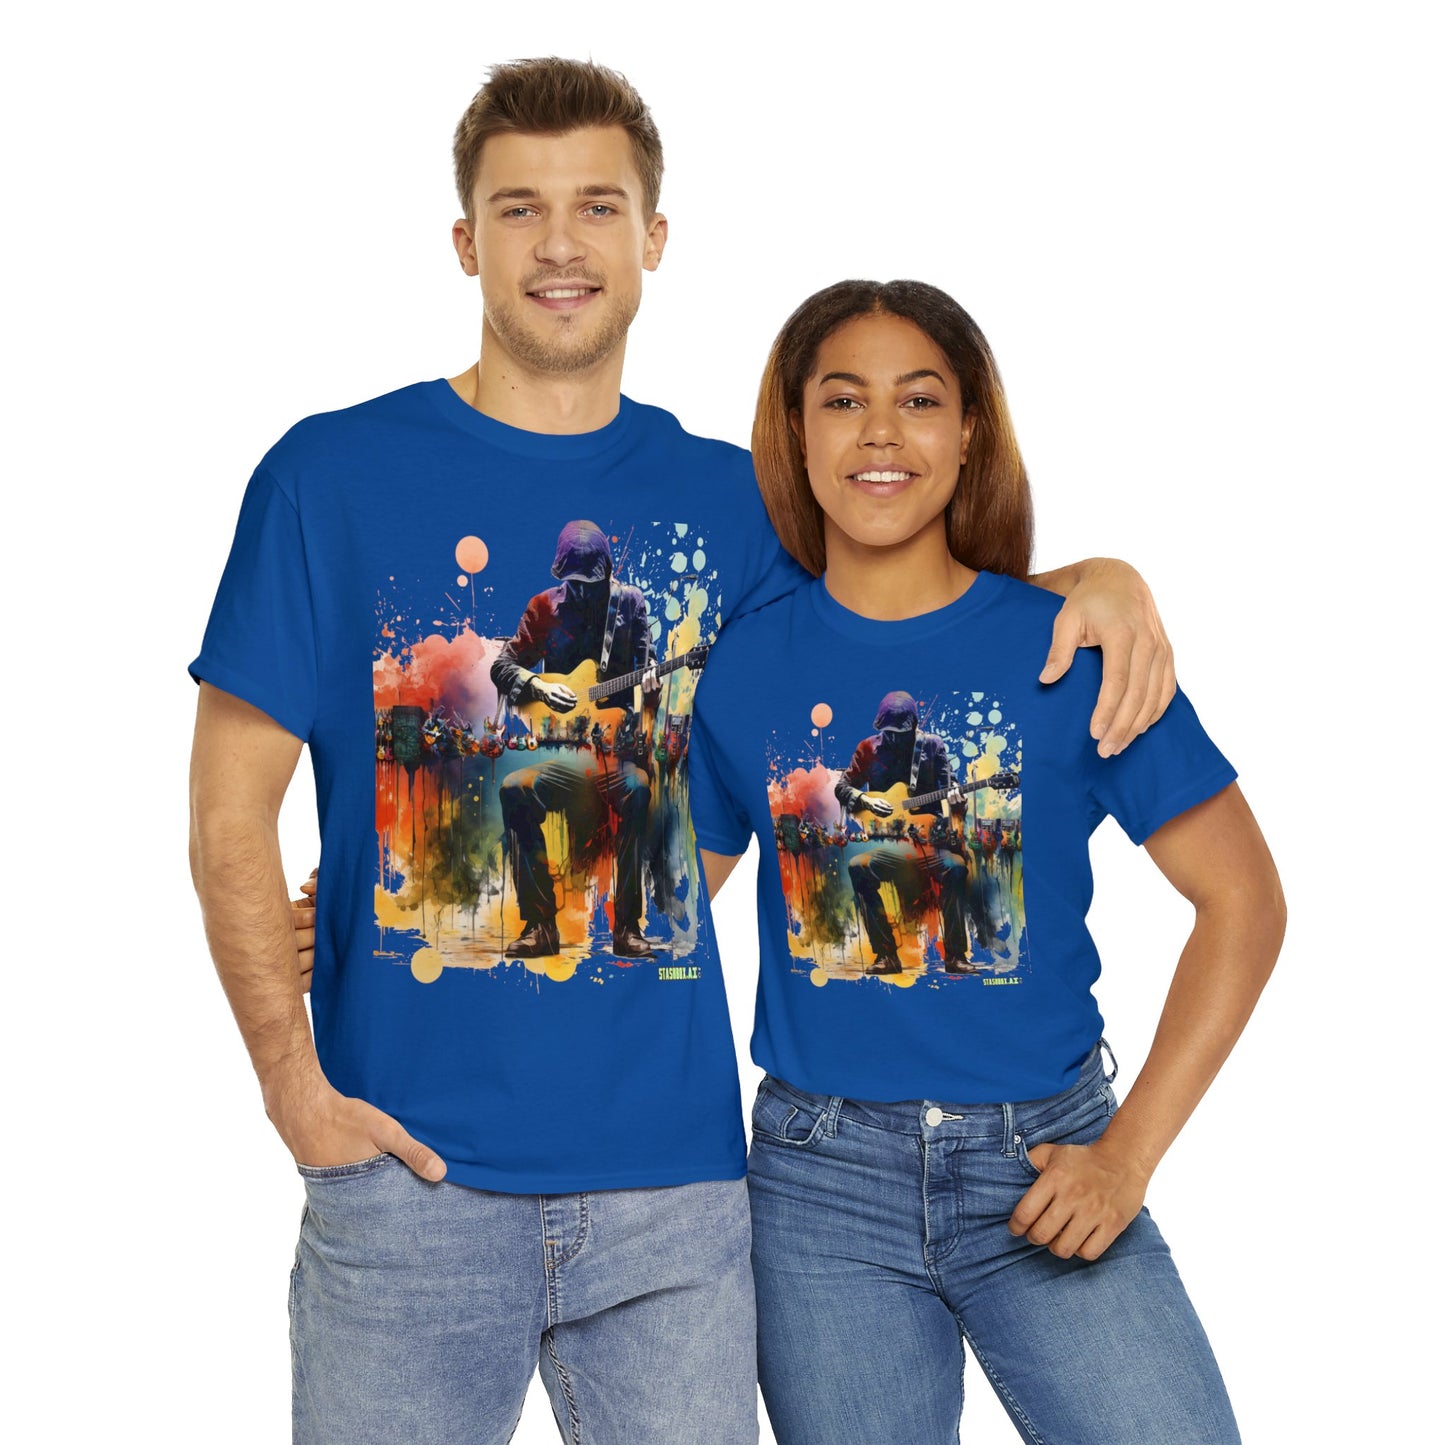 Unisex Adult Size Heavy Cotton Tshirt Colorful Guitarist and Guitars 007